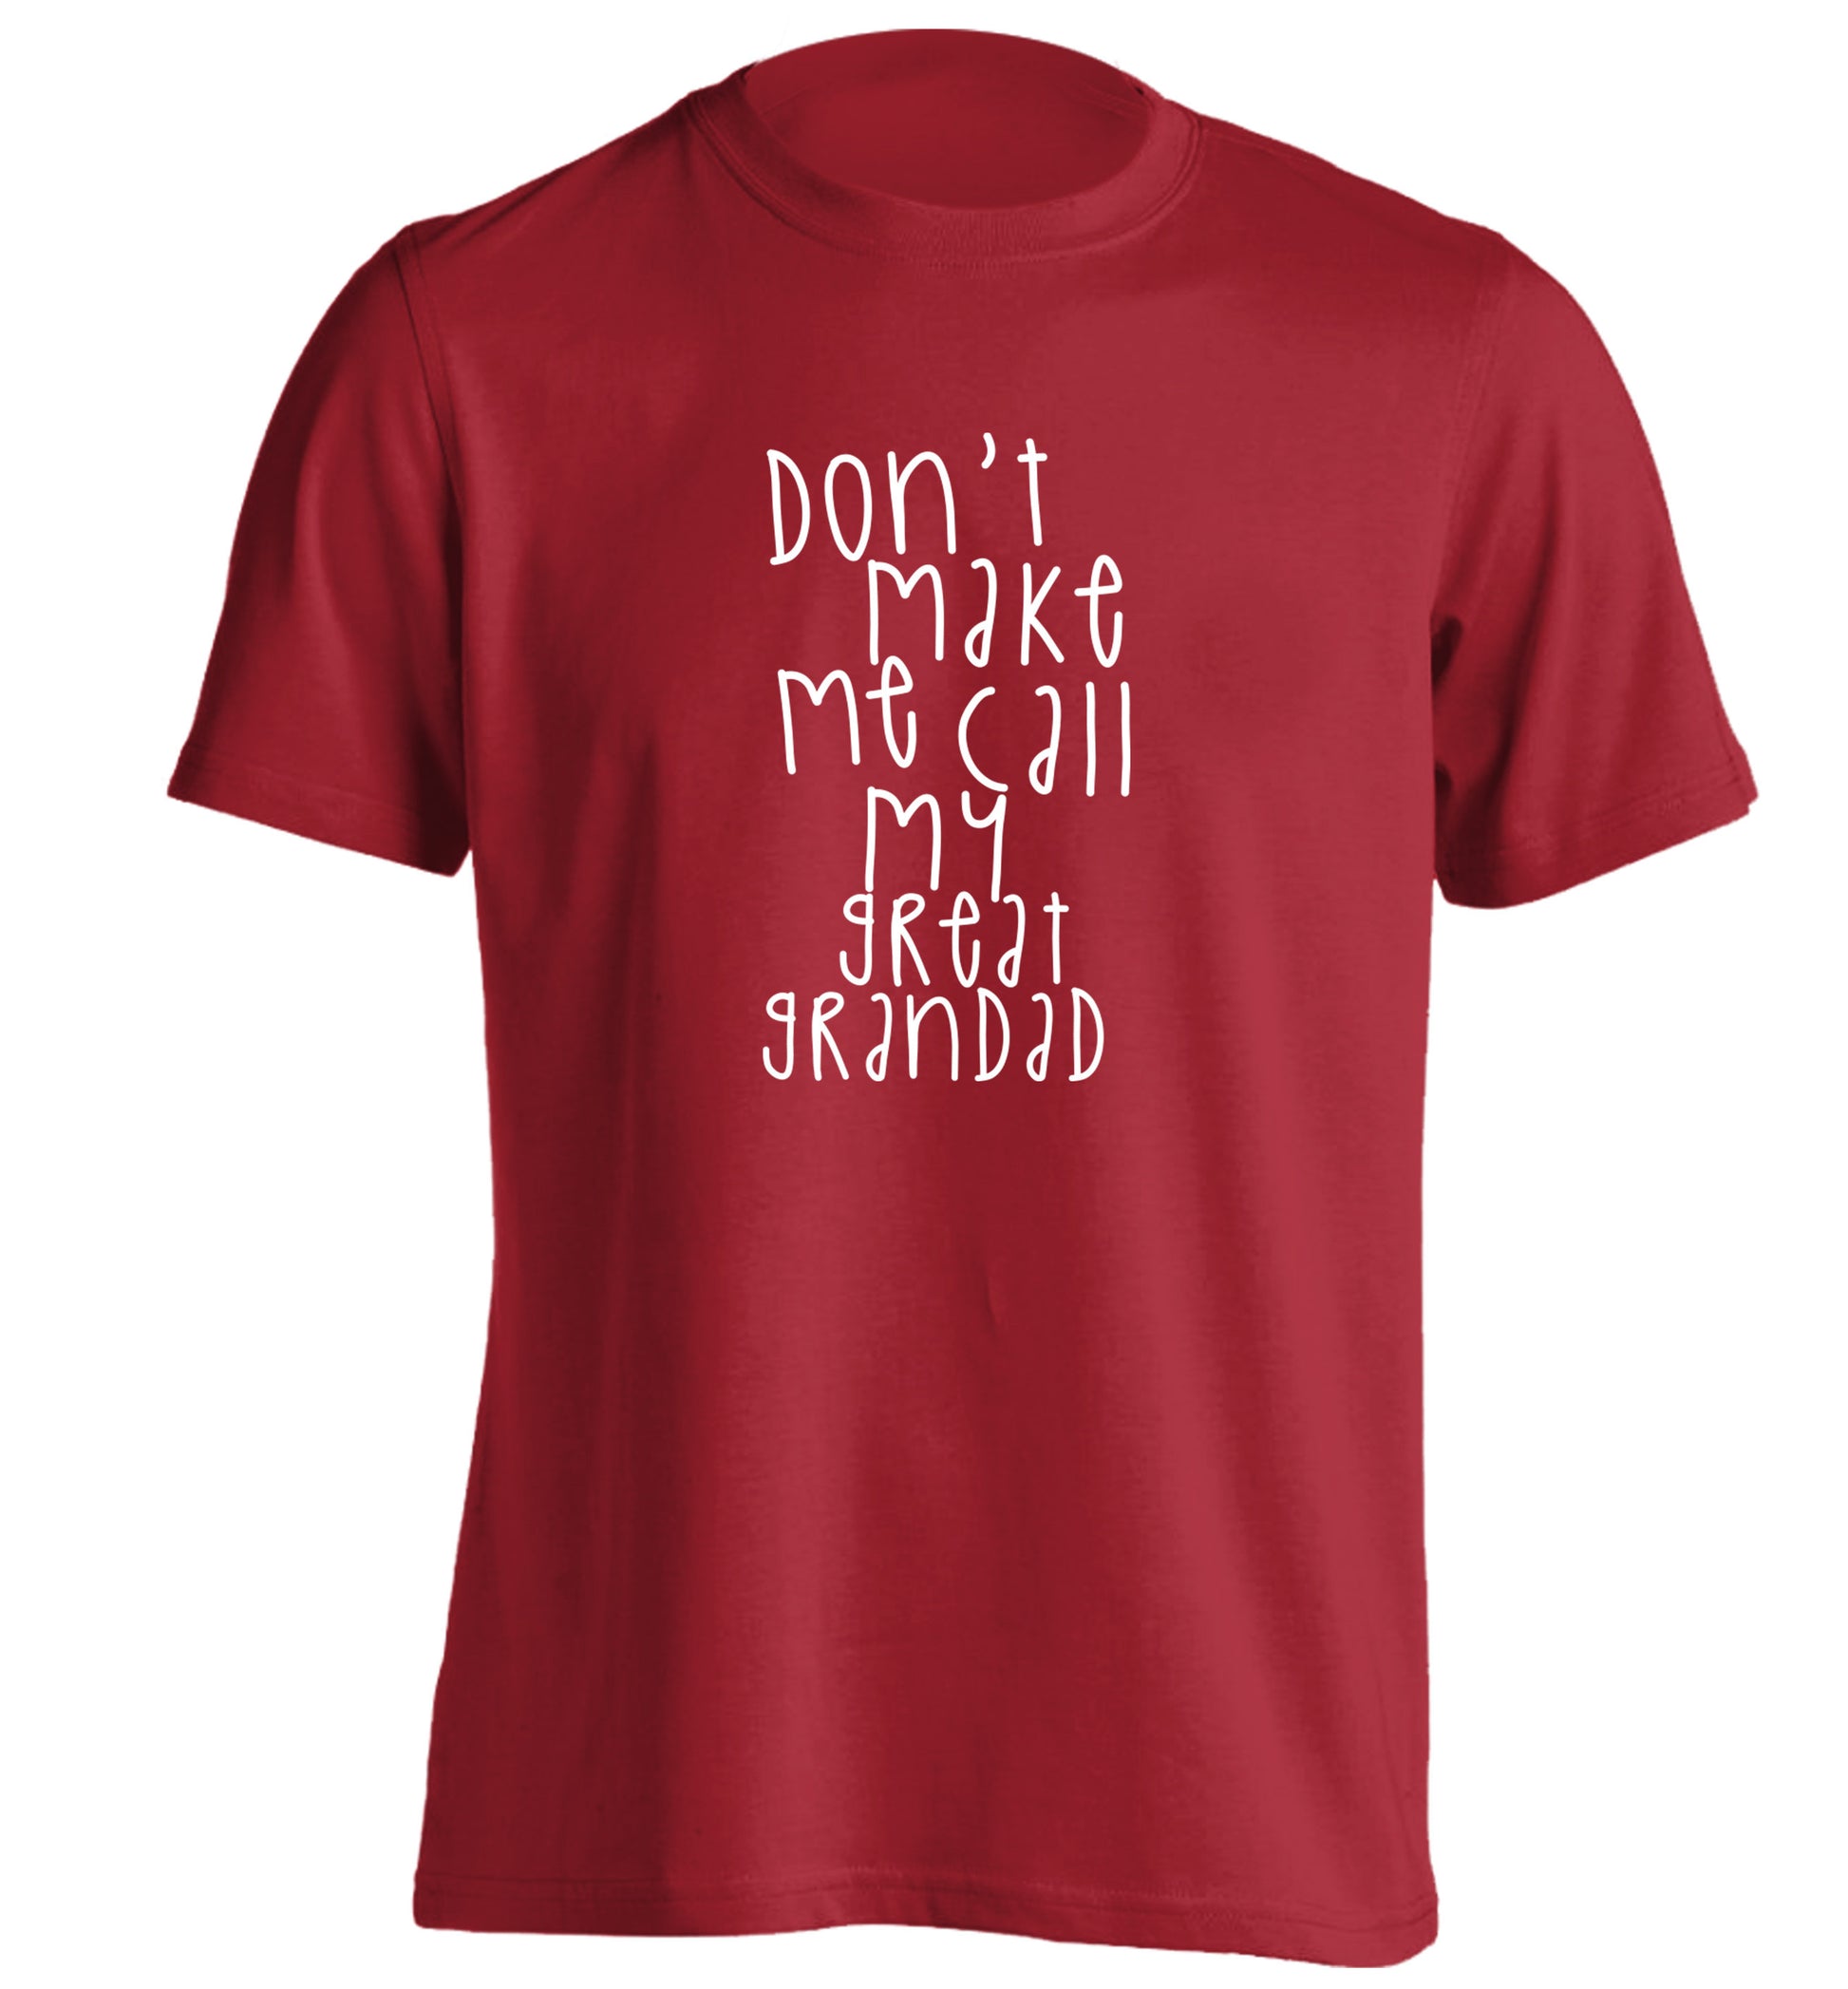 Don't make me call my great grandad adults unisex red Tshirt 2XL